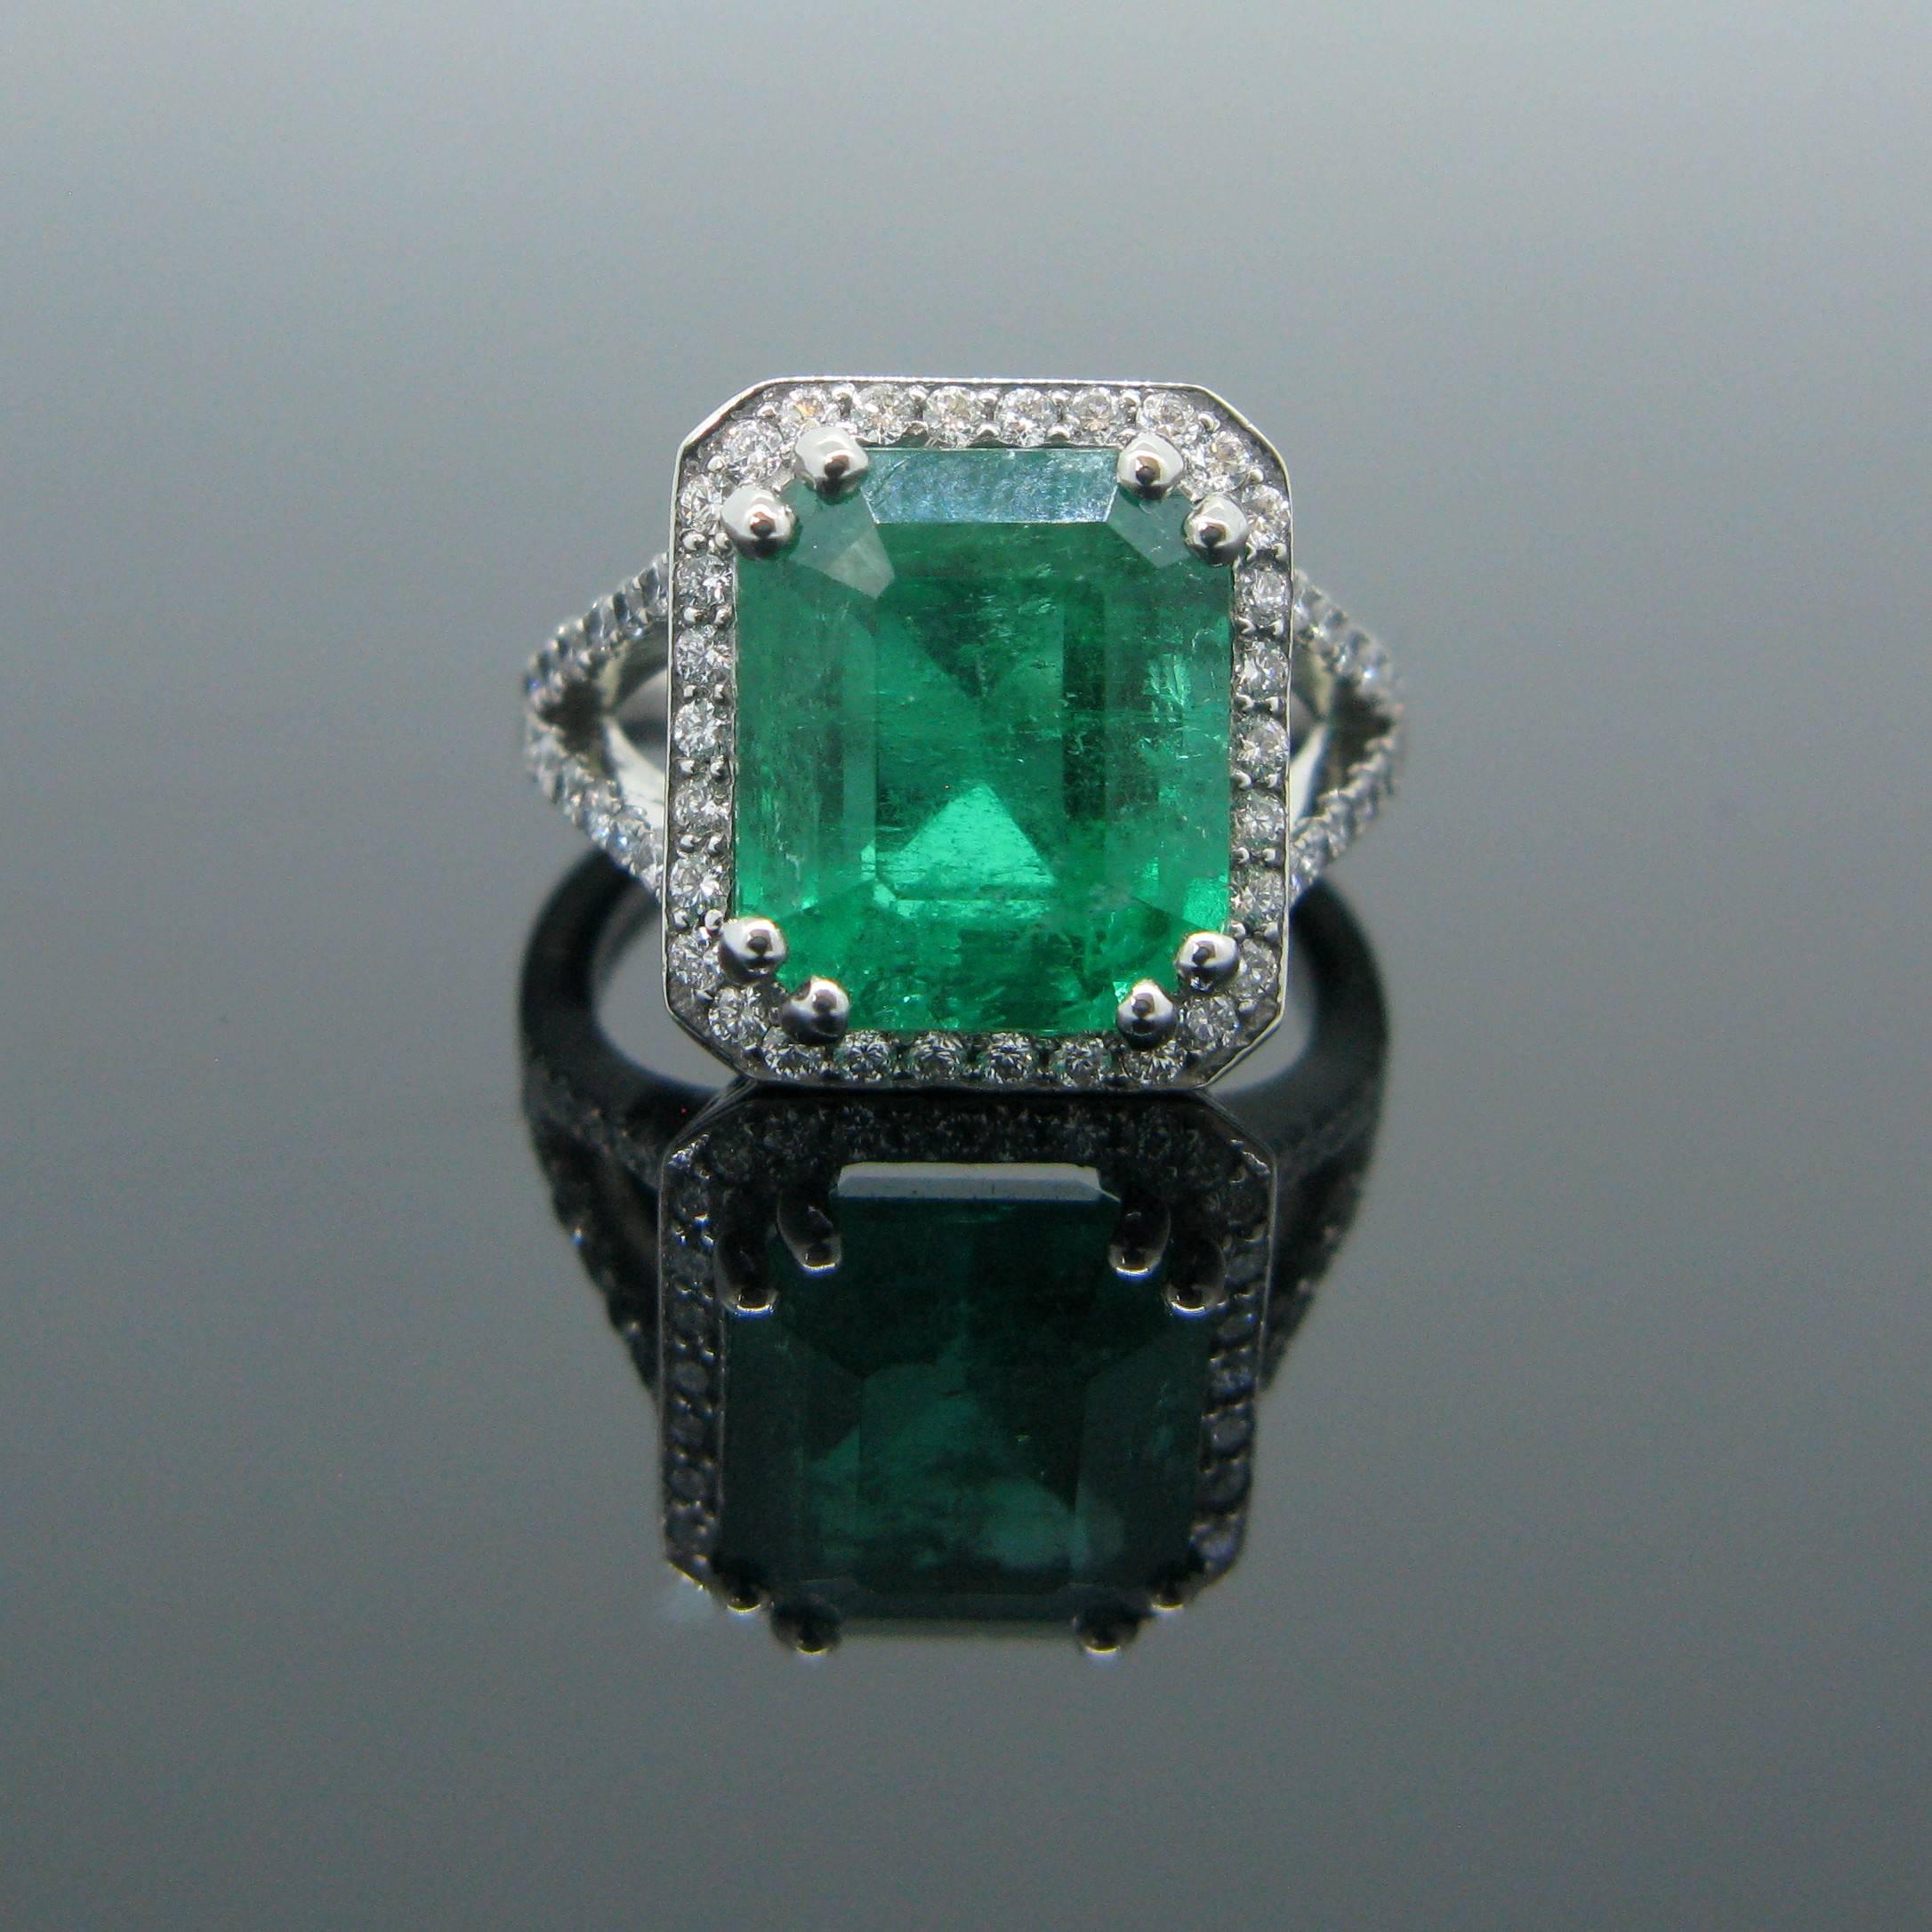 This stunning new ring is made in platinum and features a magnificent 6.14ct Colombian emerald with a vibrant green color. The stone is surrounded with 30 small diamonds and 28 diamonds on each side of the ring. Emerald is also known as the stone of